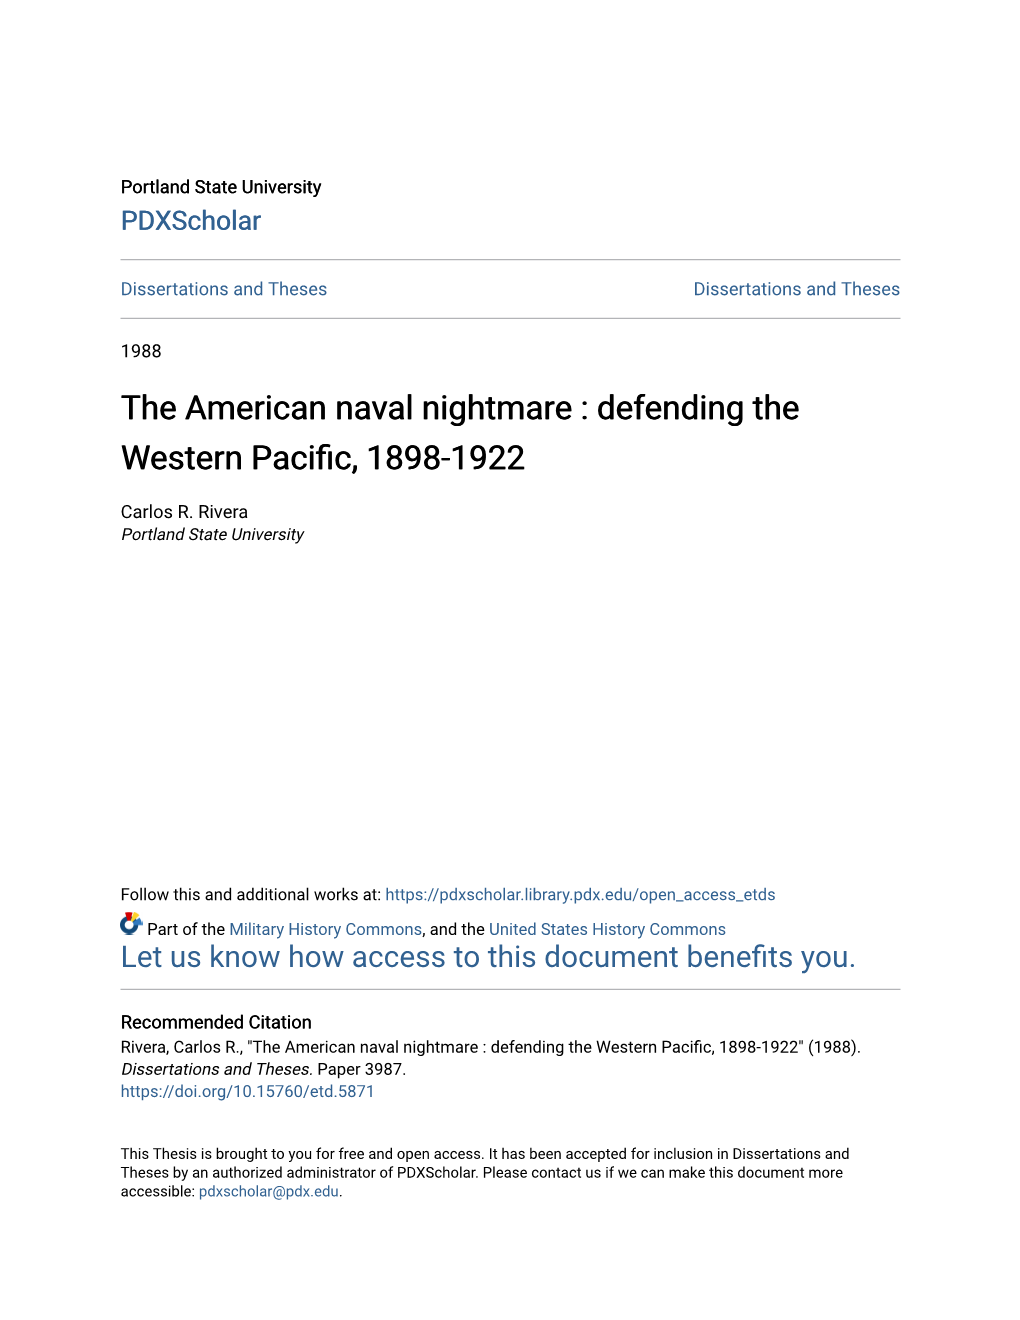 The American Naval Nightmare : Defending the Western Pacific, 1898-1922